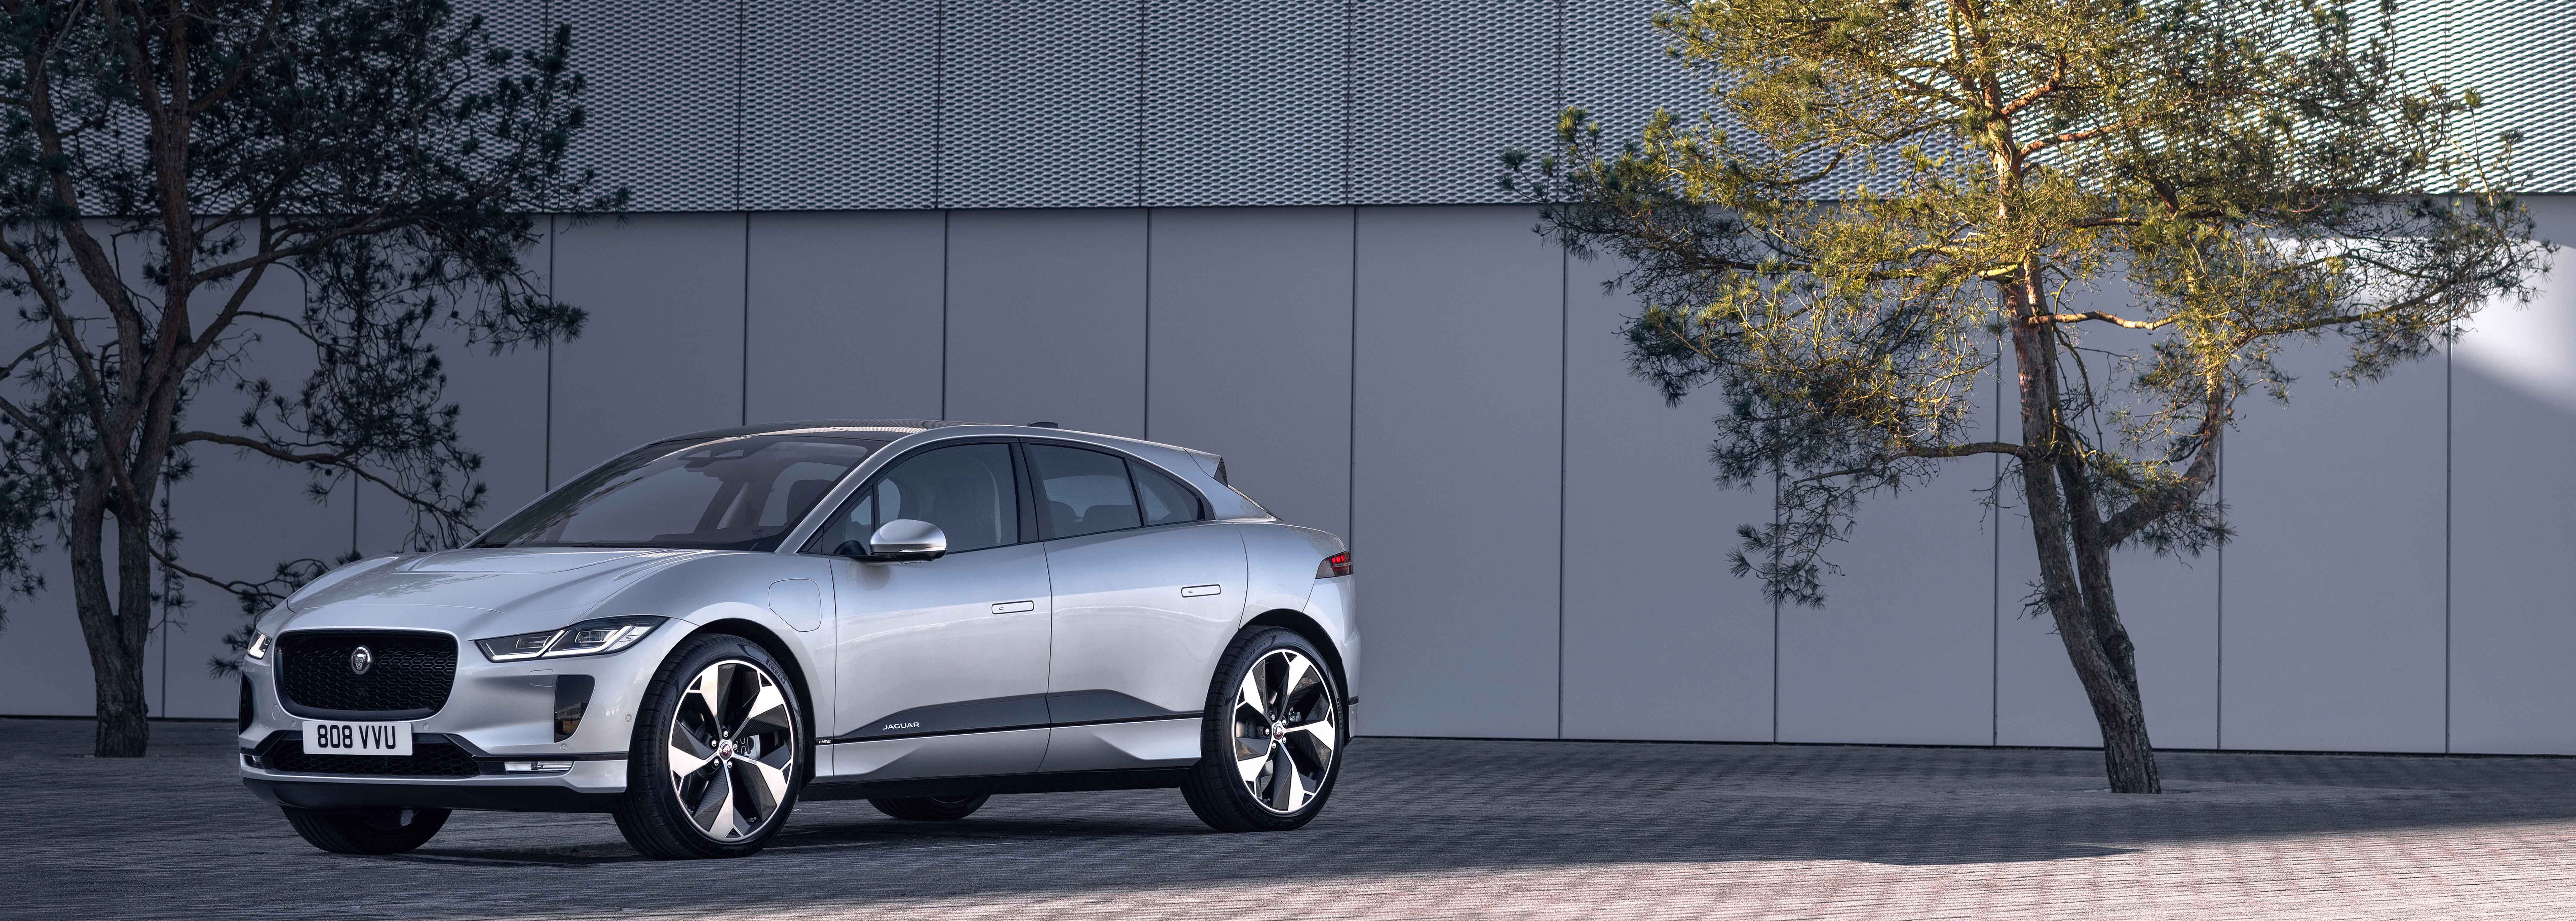 Updated Jaguar I-Pace now on sale